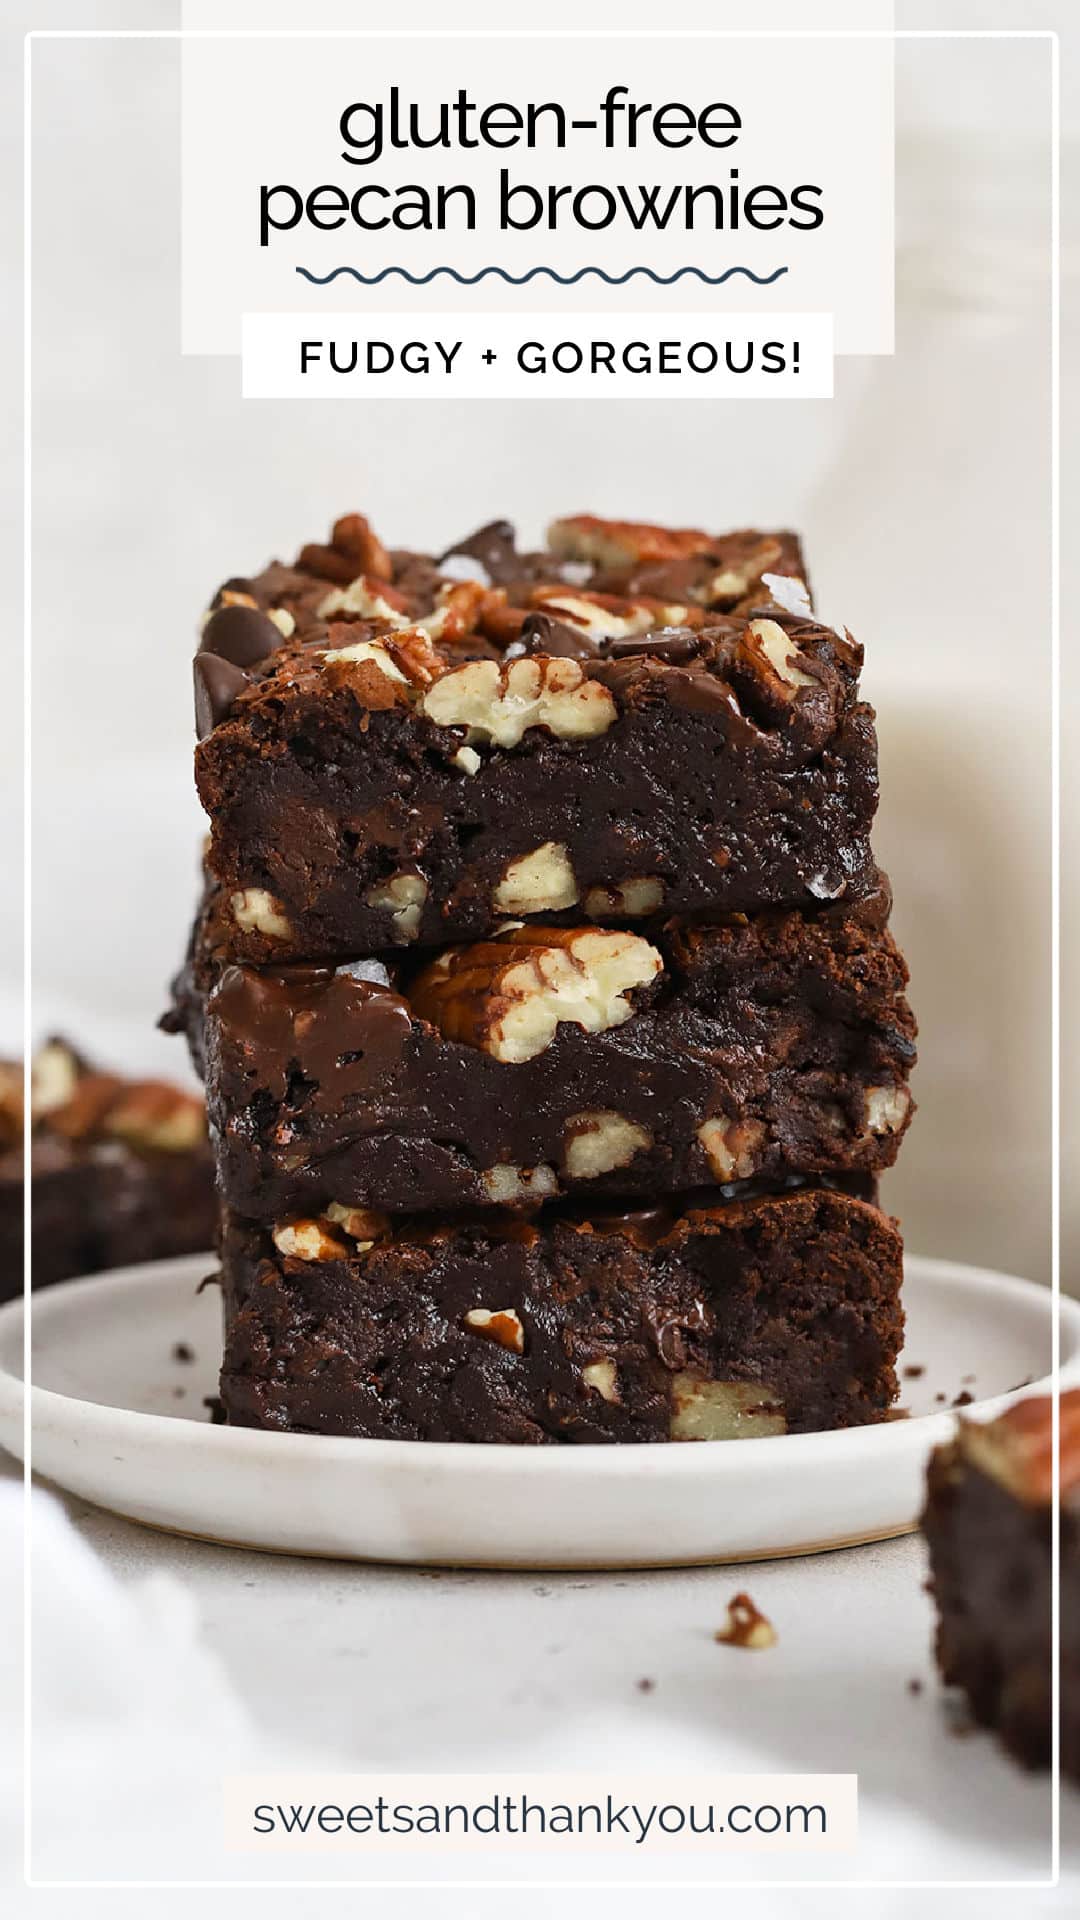 Our Fudgy gluten-free pecan brownies recipe has the most incredible texture and flavor, thanks to brown butter, toasted pecans, and plenty of chocolate! / gluten-free brownie recipe with pecans / gluten-free pecan brownie recipe / gluten-free brownies with pecans / gluten-free brownies with nuts / gluten-free dessert recipe / easy gluten-free brownies 